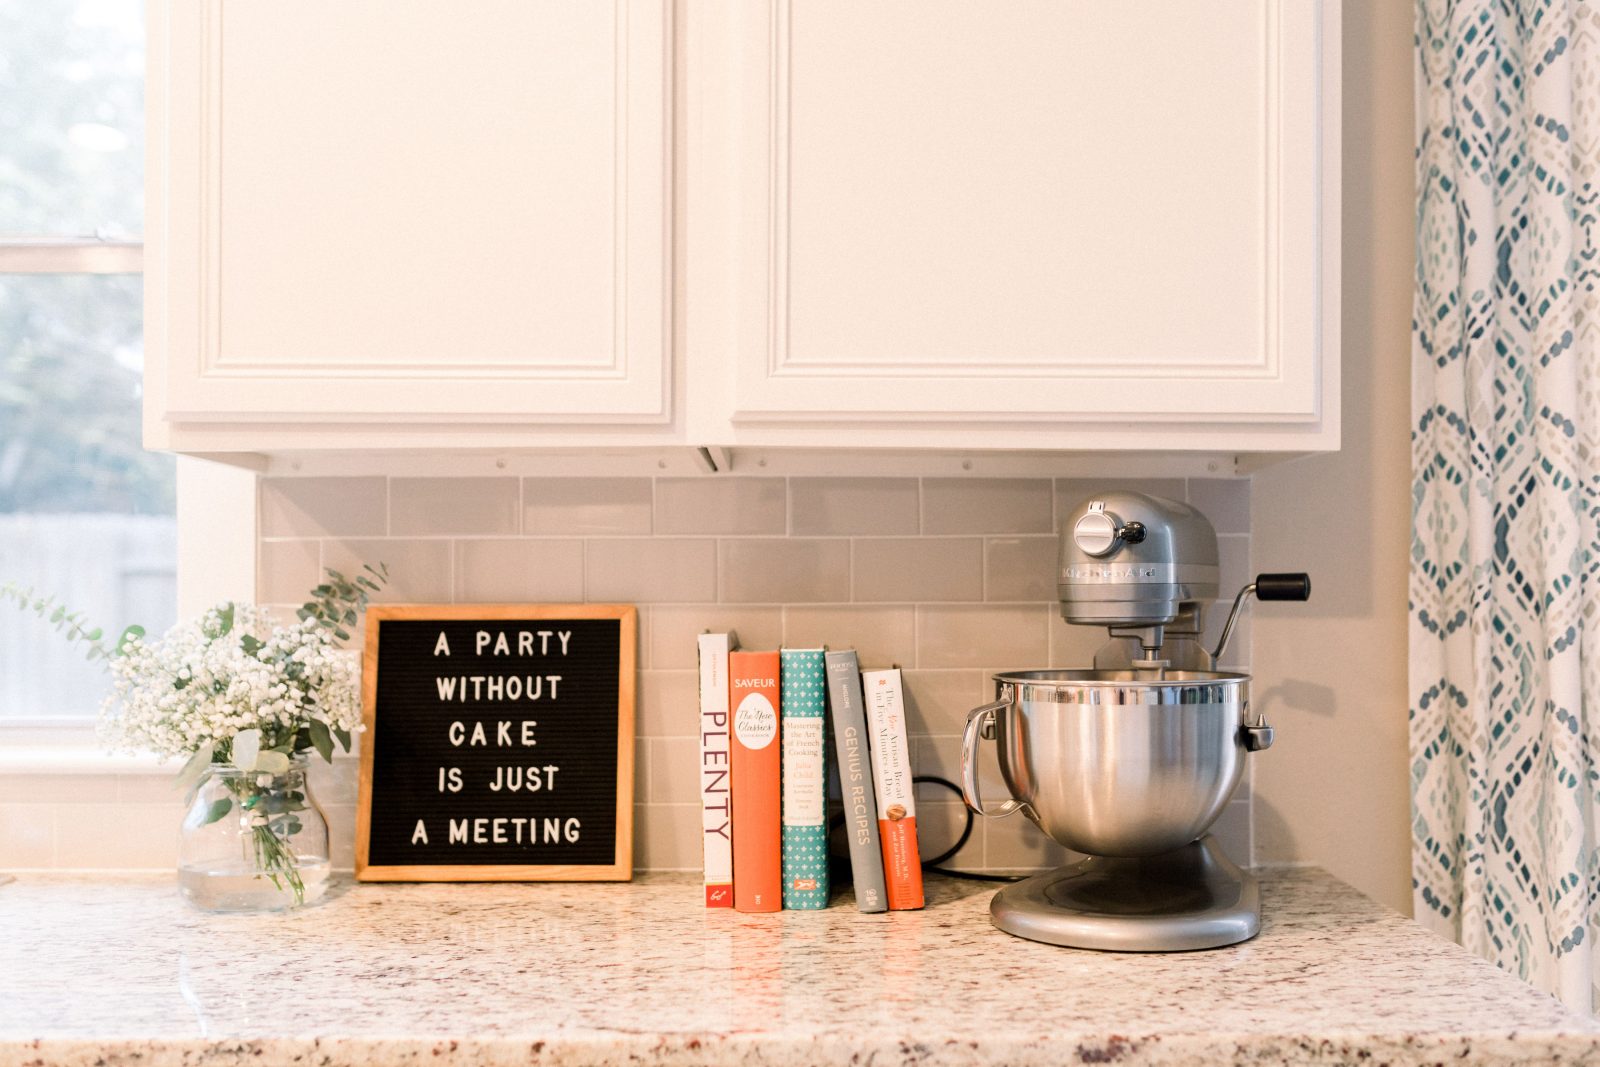 kitchen picture with books, stand mixer, and sign that read "a party without cake is just a meeting'